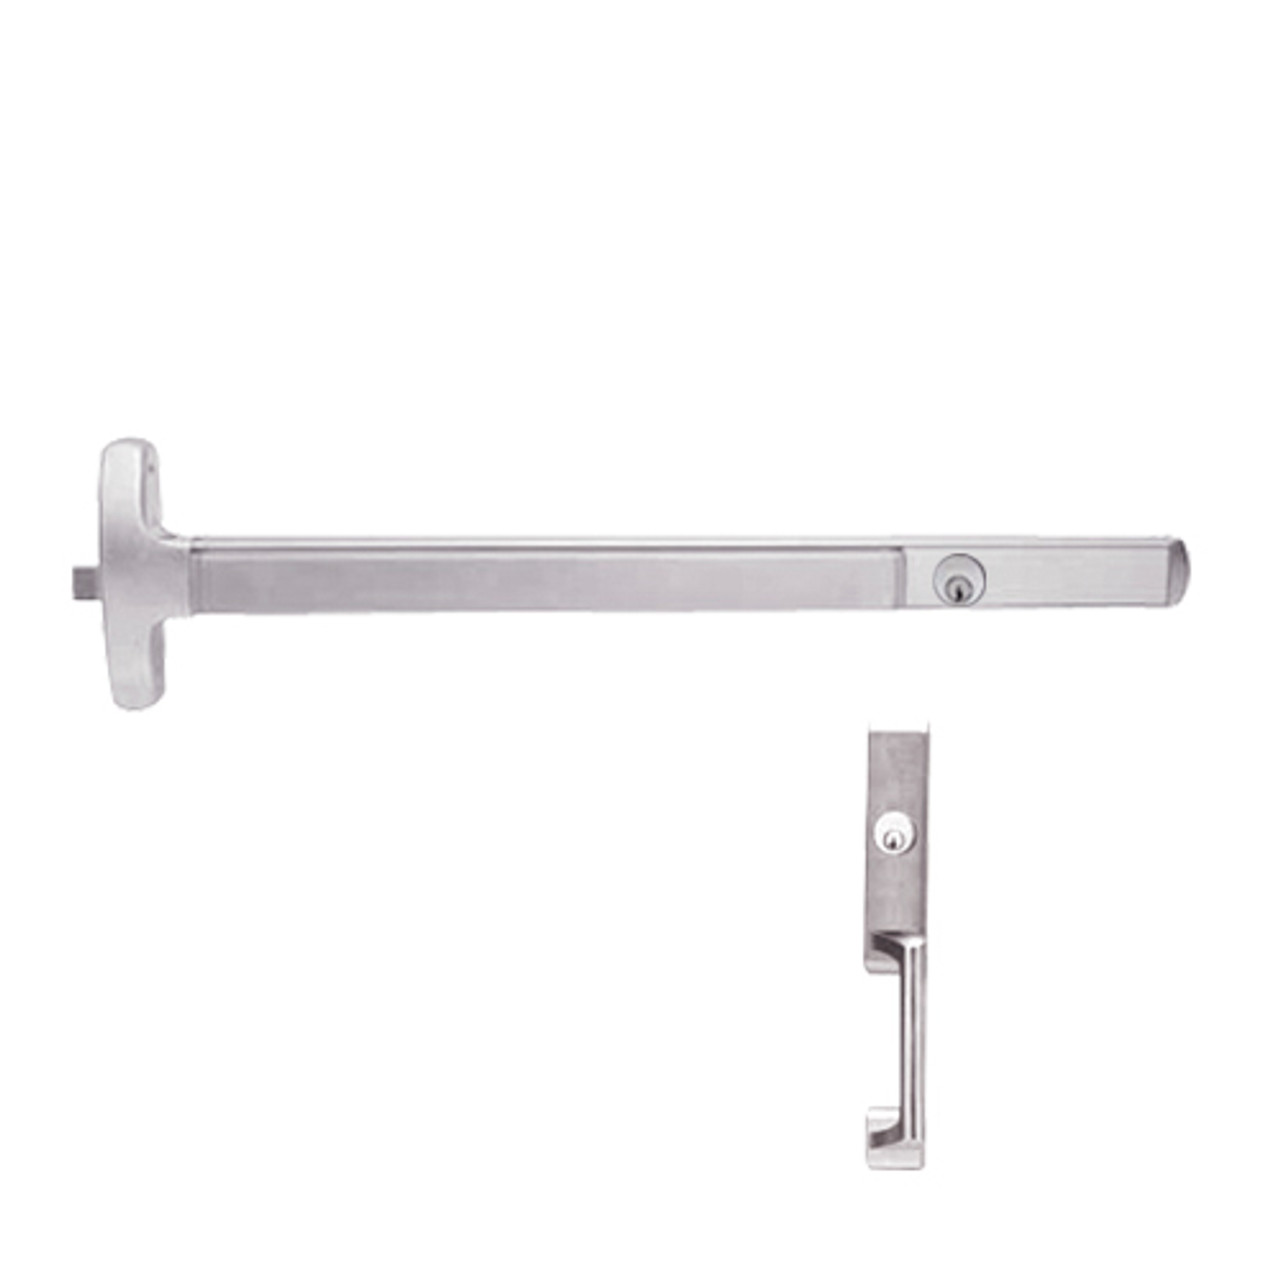 CD24-R-NL-US32-4-RHR Falcon Exit Device in Polished Stainless Steel